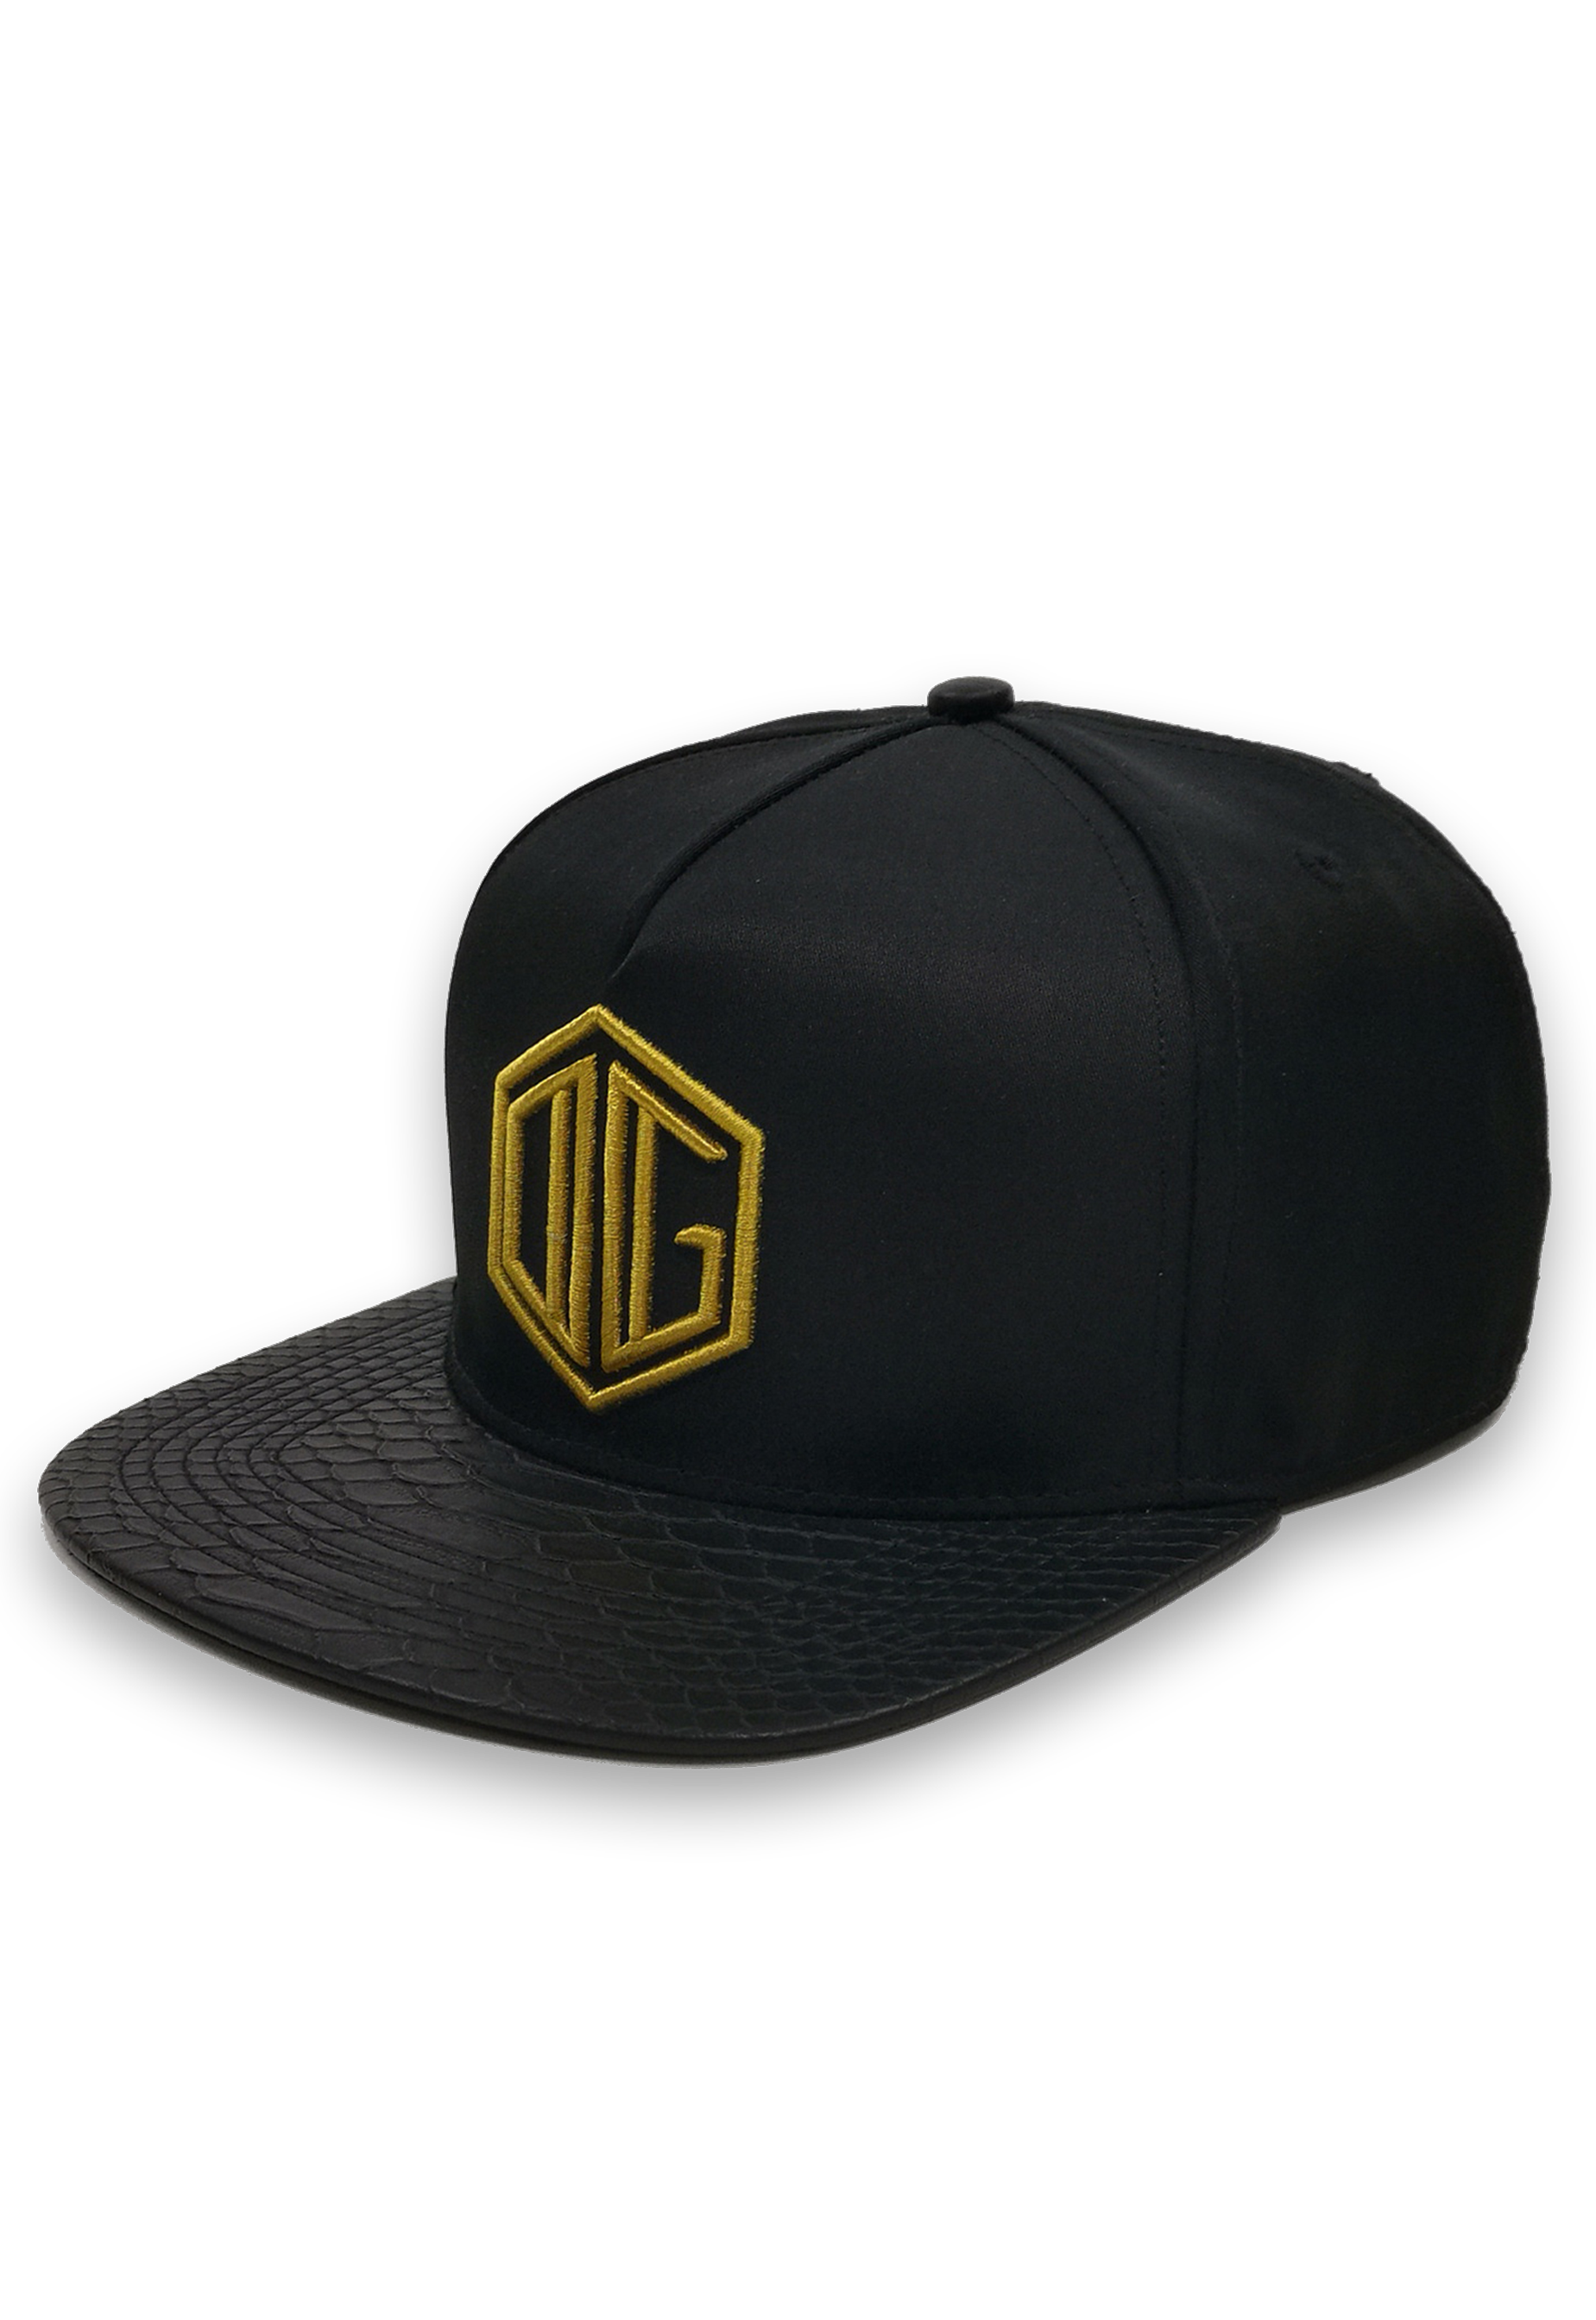 black and gold embroidery snapback hat